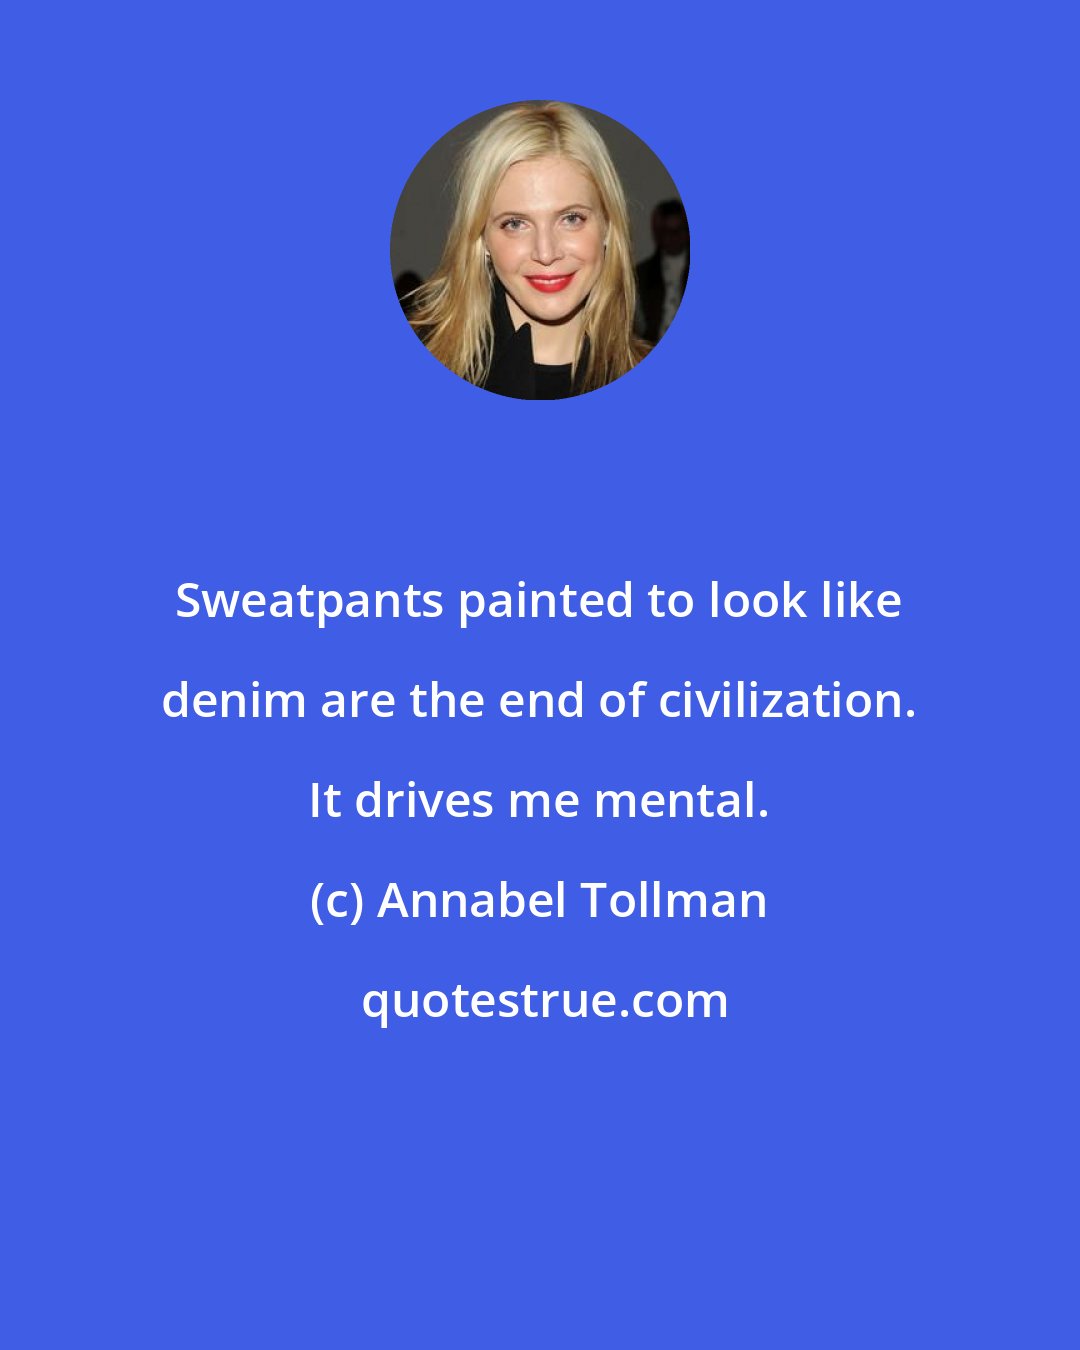 Annabel Tollman: Sweatpants painted to look like denim are the end of civilization. It drives me mental.